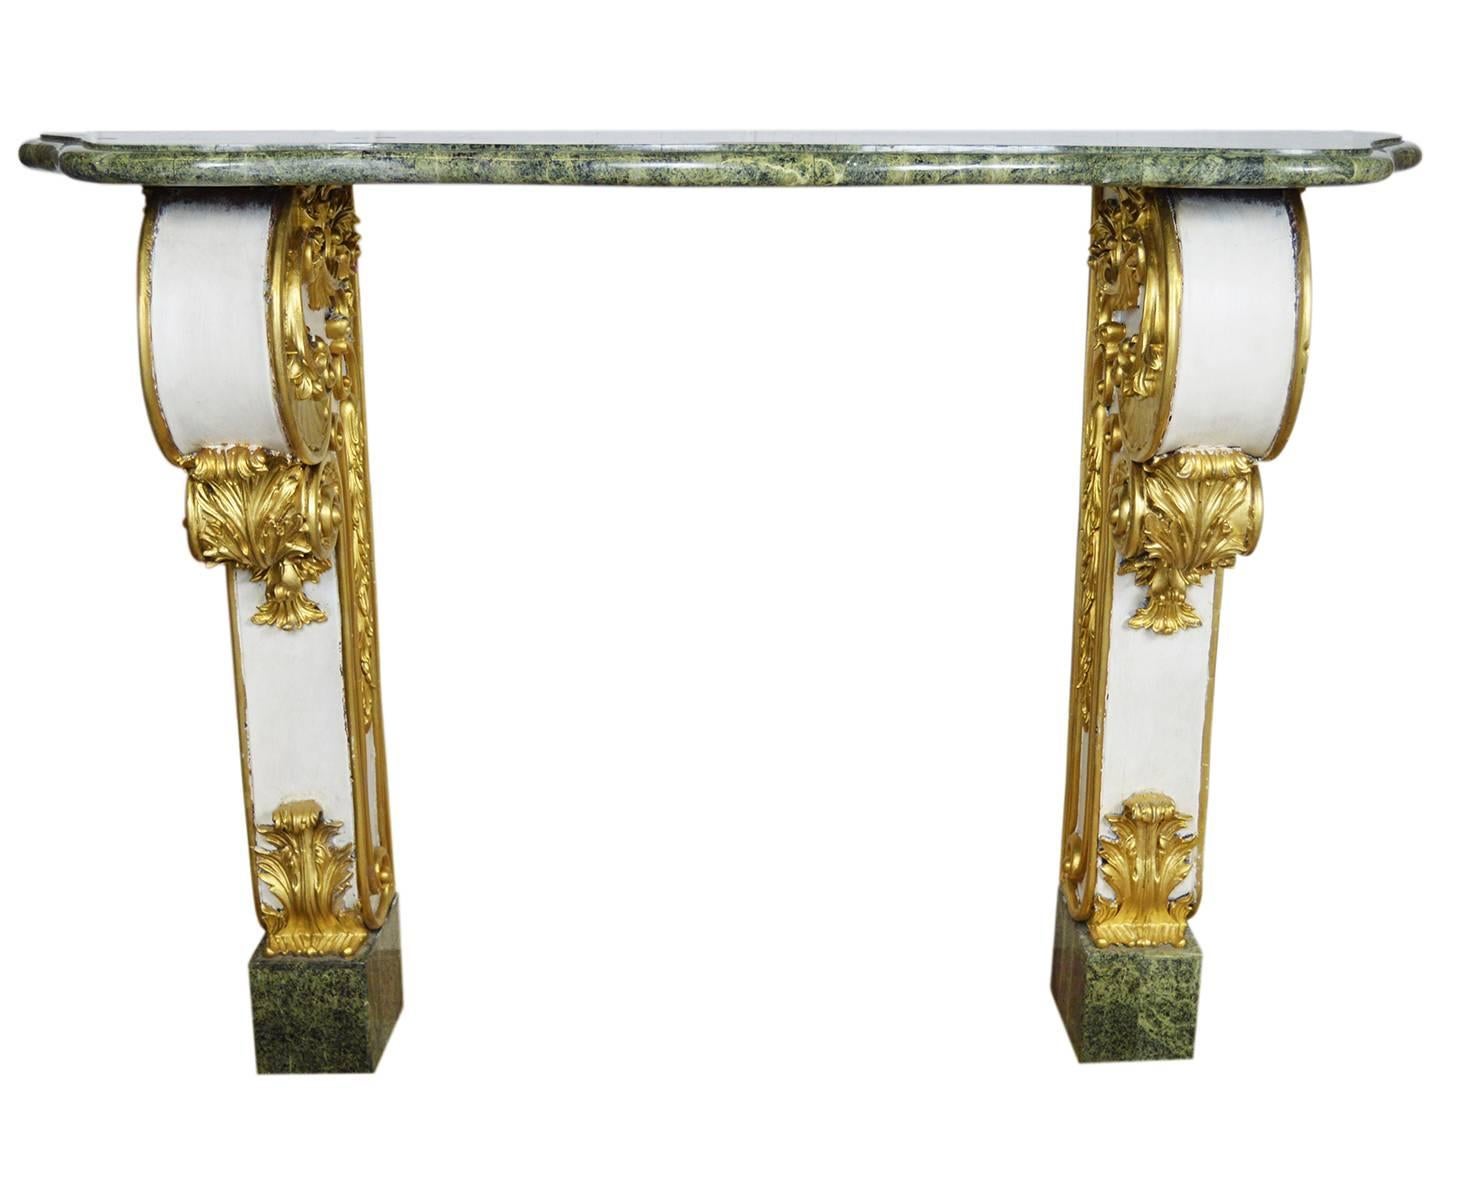 Vintage French marble top console. The green marble rests on French fragment bases adorned with gilt scroll and foliate styling. Holes in the back to mount to wall.